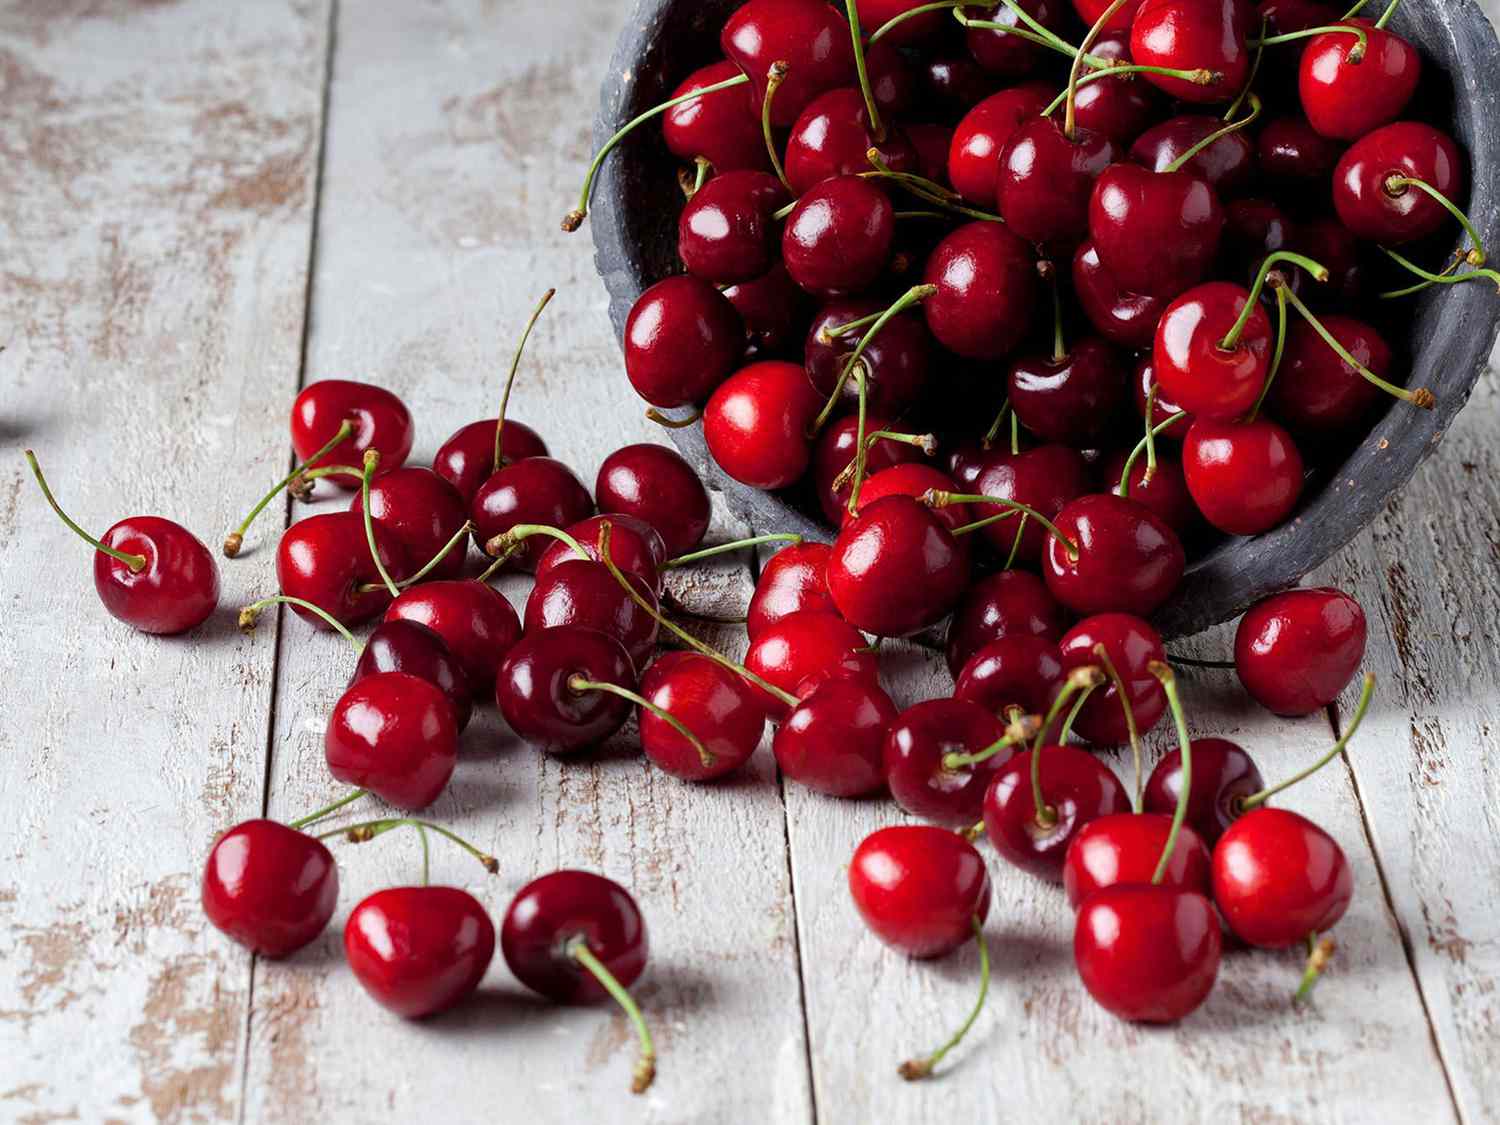 how-to-eat-cherries-without-staining-your-hands